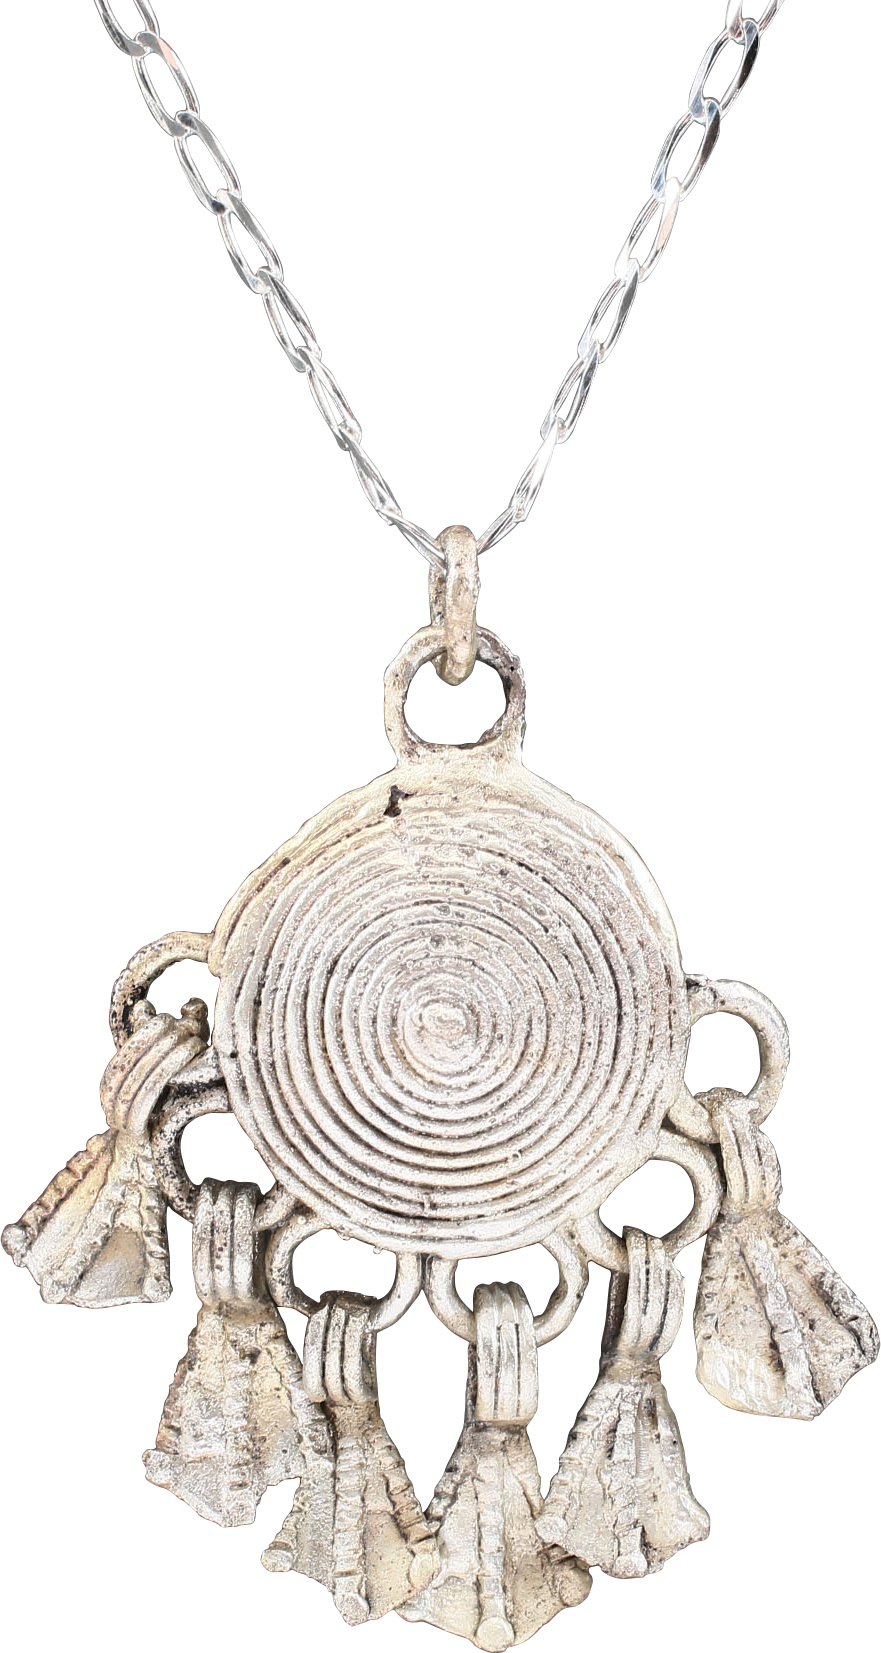 A FINE AND VERY RARE VIKING SORCERESS’S PENDANT NECKLACE, 10th-11th CENTURY AD - Fagan Arms